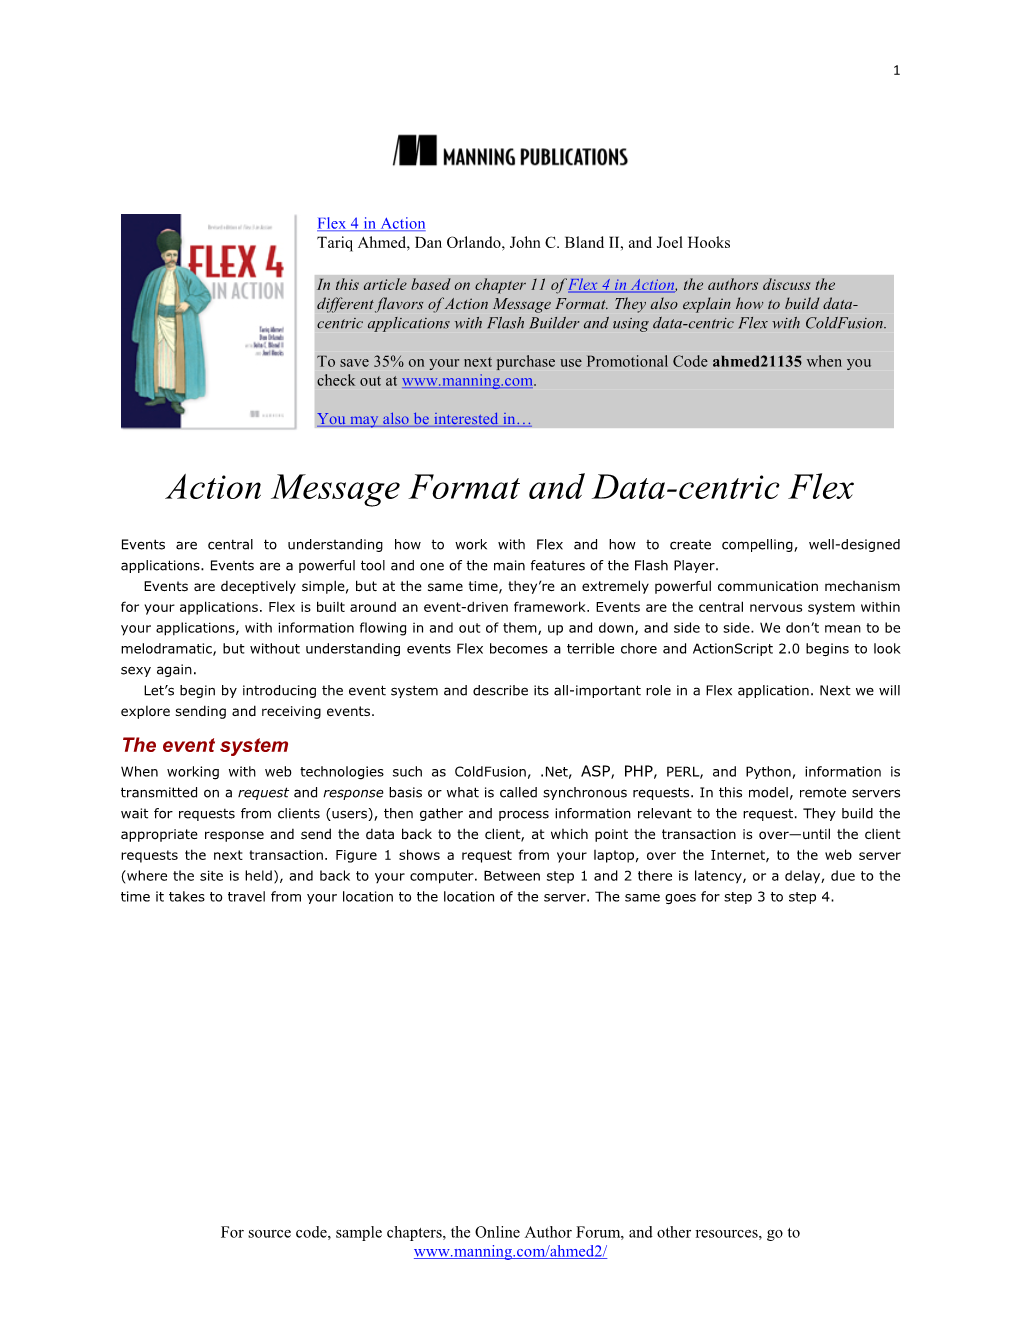 Action Message Format and Data-Centric Flex